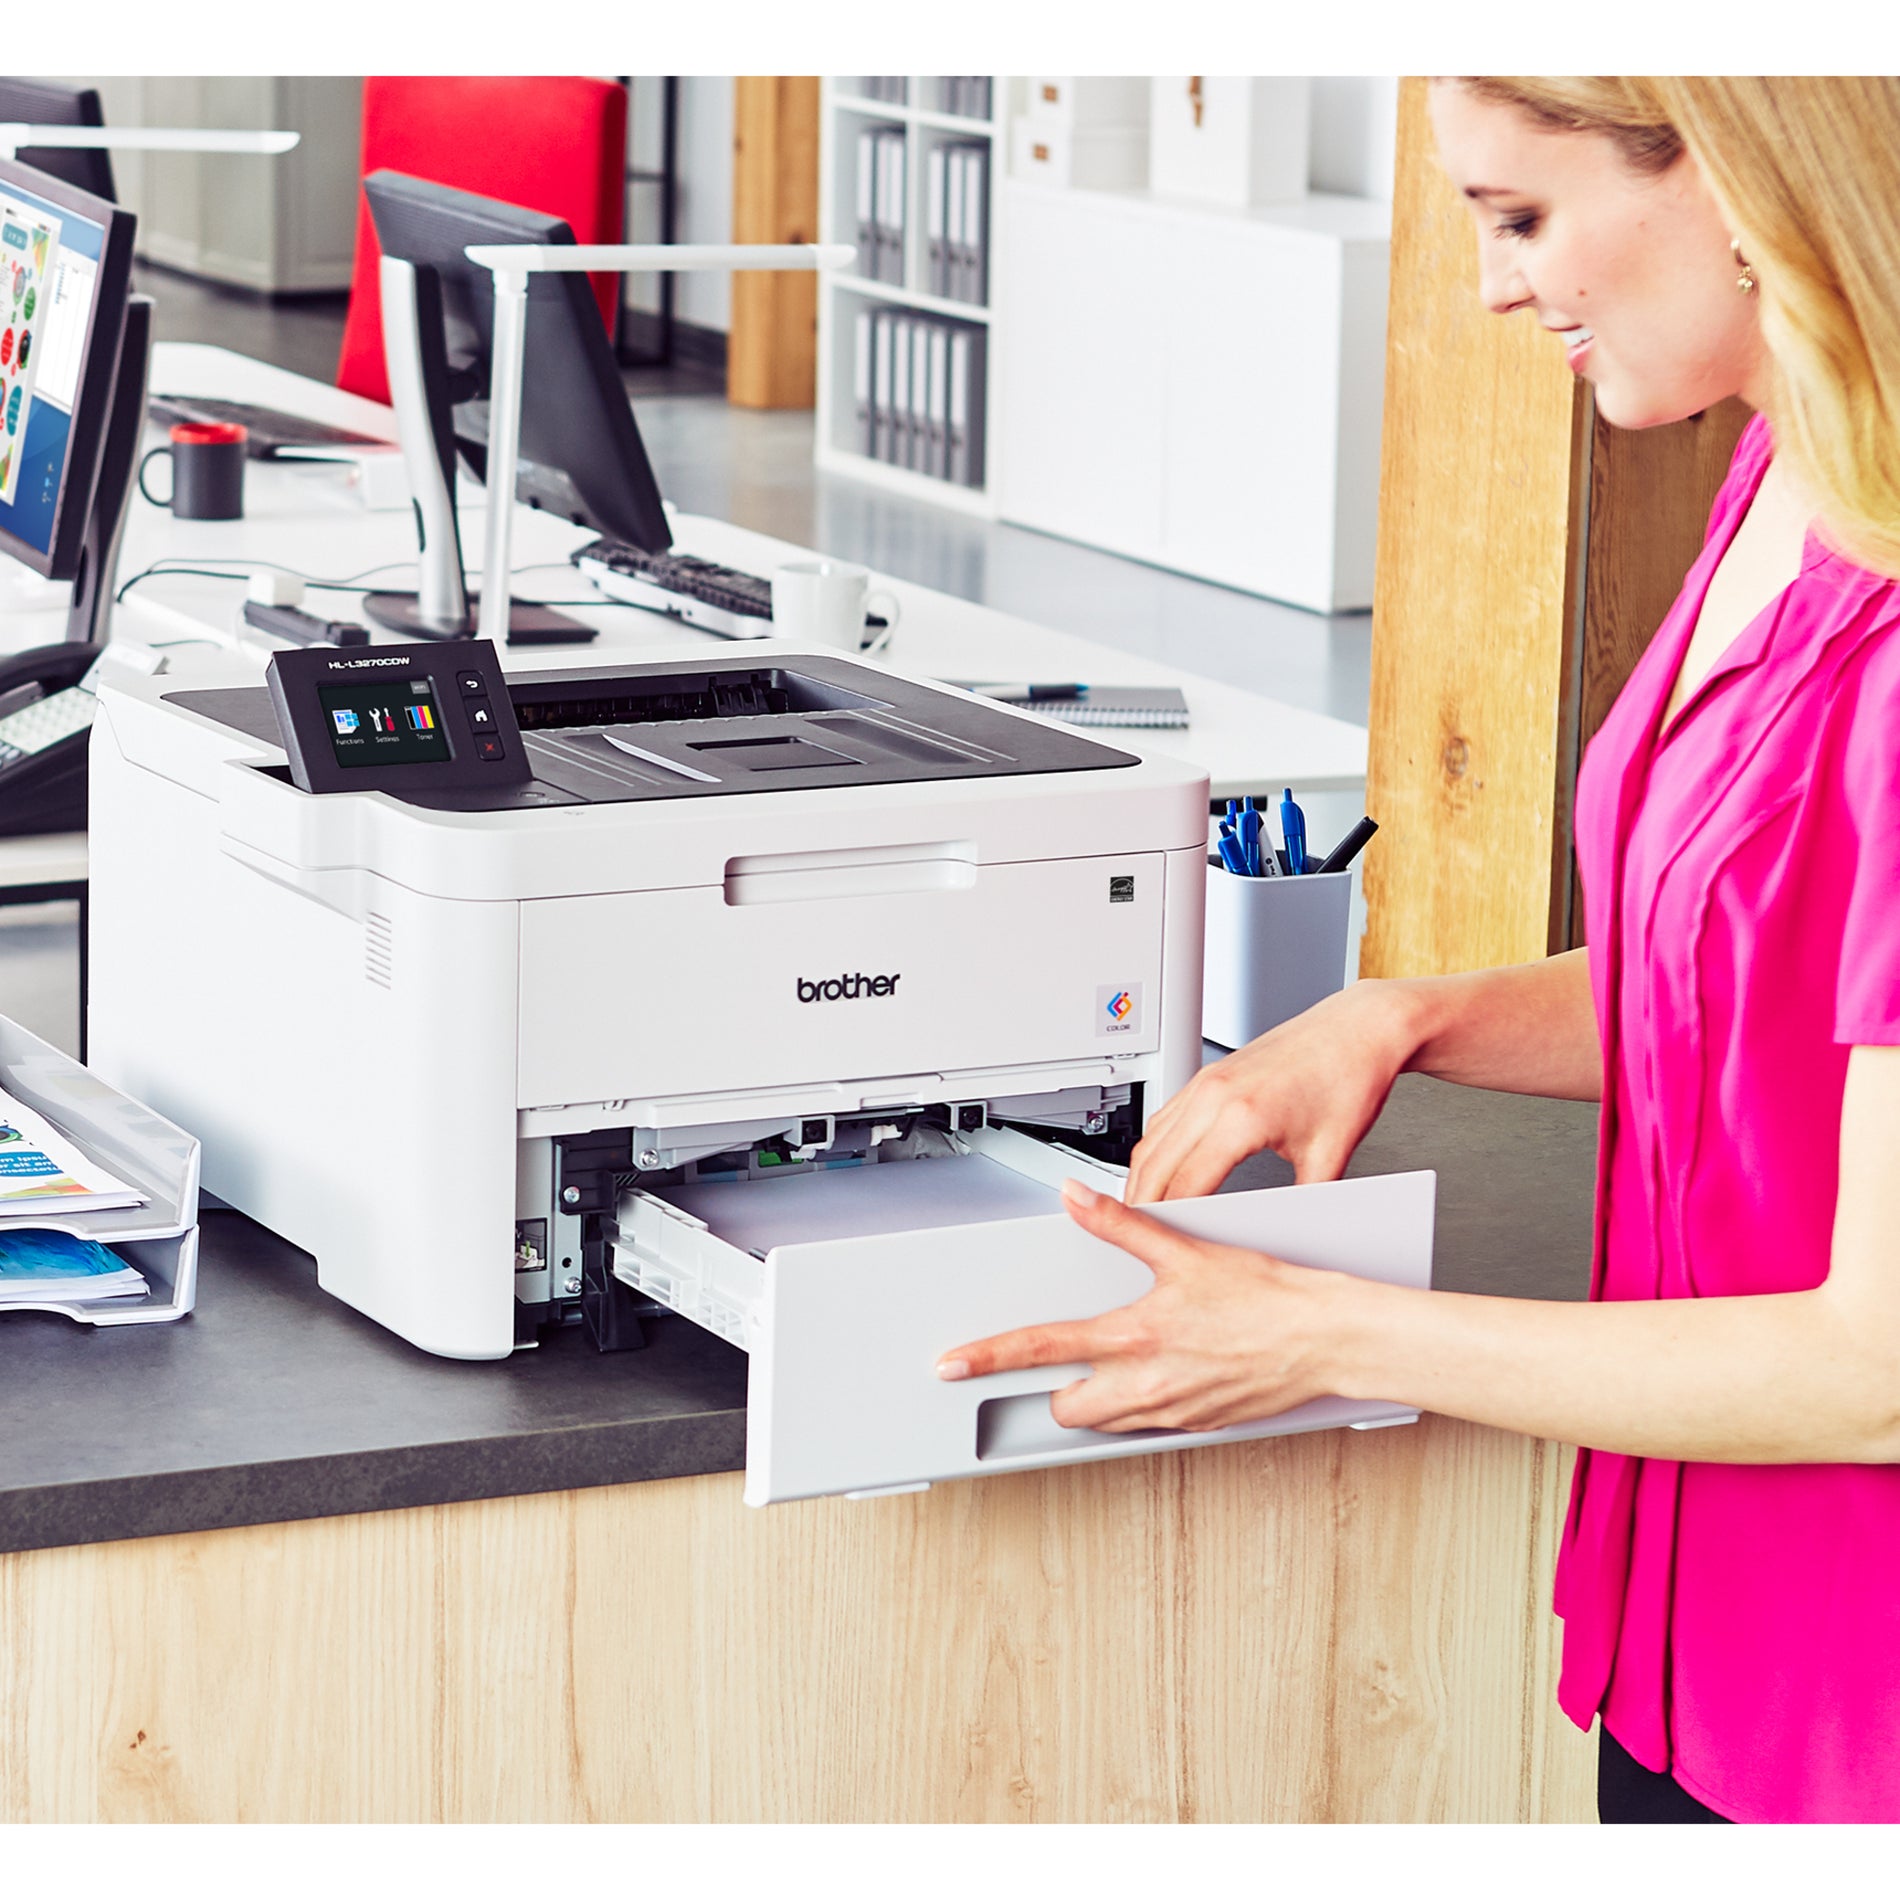 Brother HL-L3270cdw Laser Printer, Compact Digital Color Printer with Fast Print Speeds and Wireless Connectivity